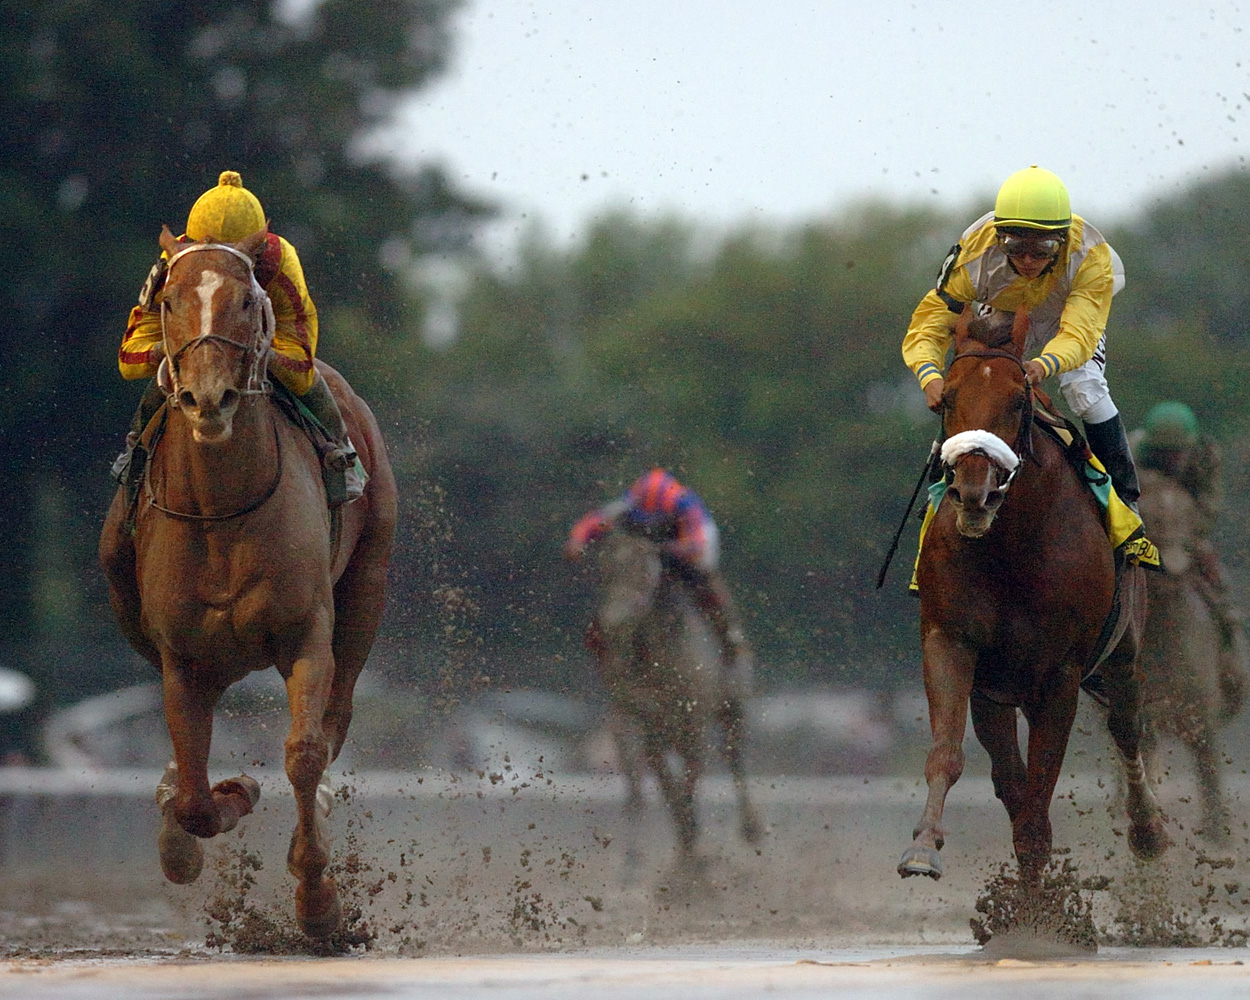 Curlin (Robby Albarado up) racing down the stretch in the 2008 Jockey Club Gold Cup at Belmont Park (NYRA)